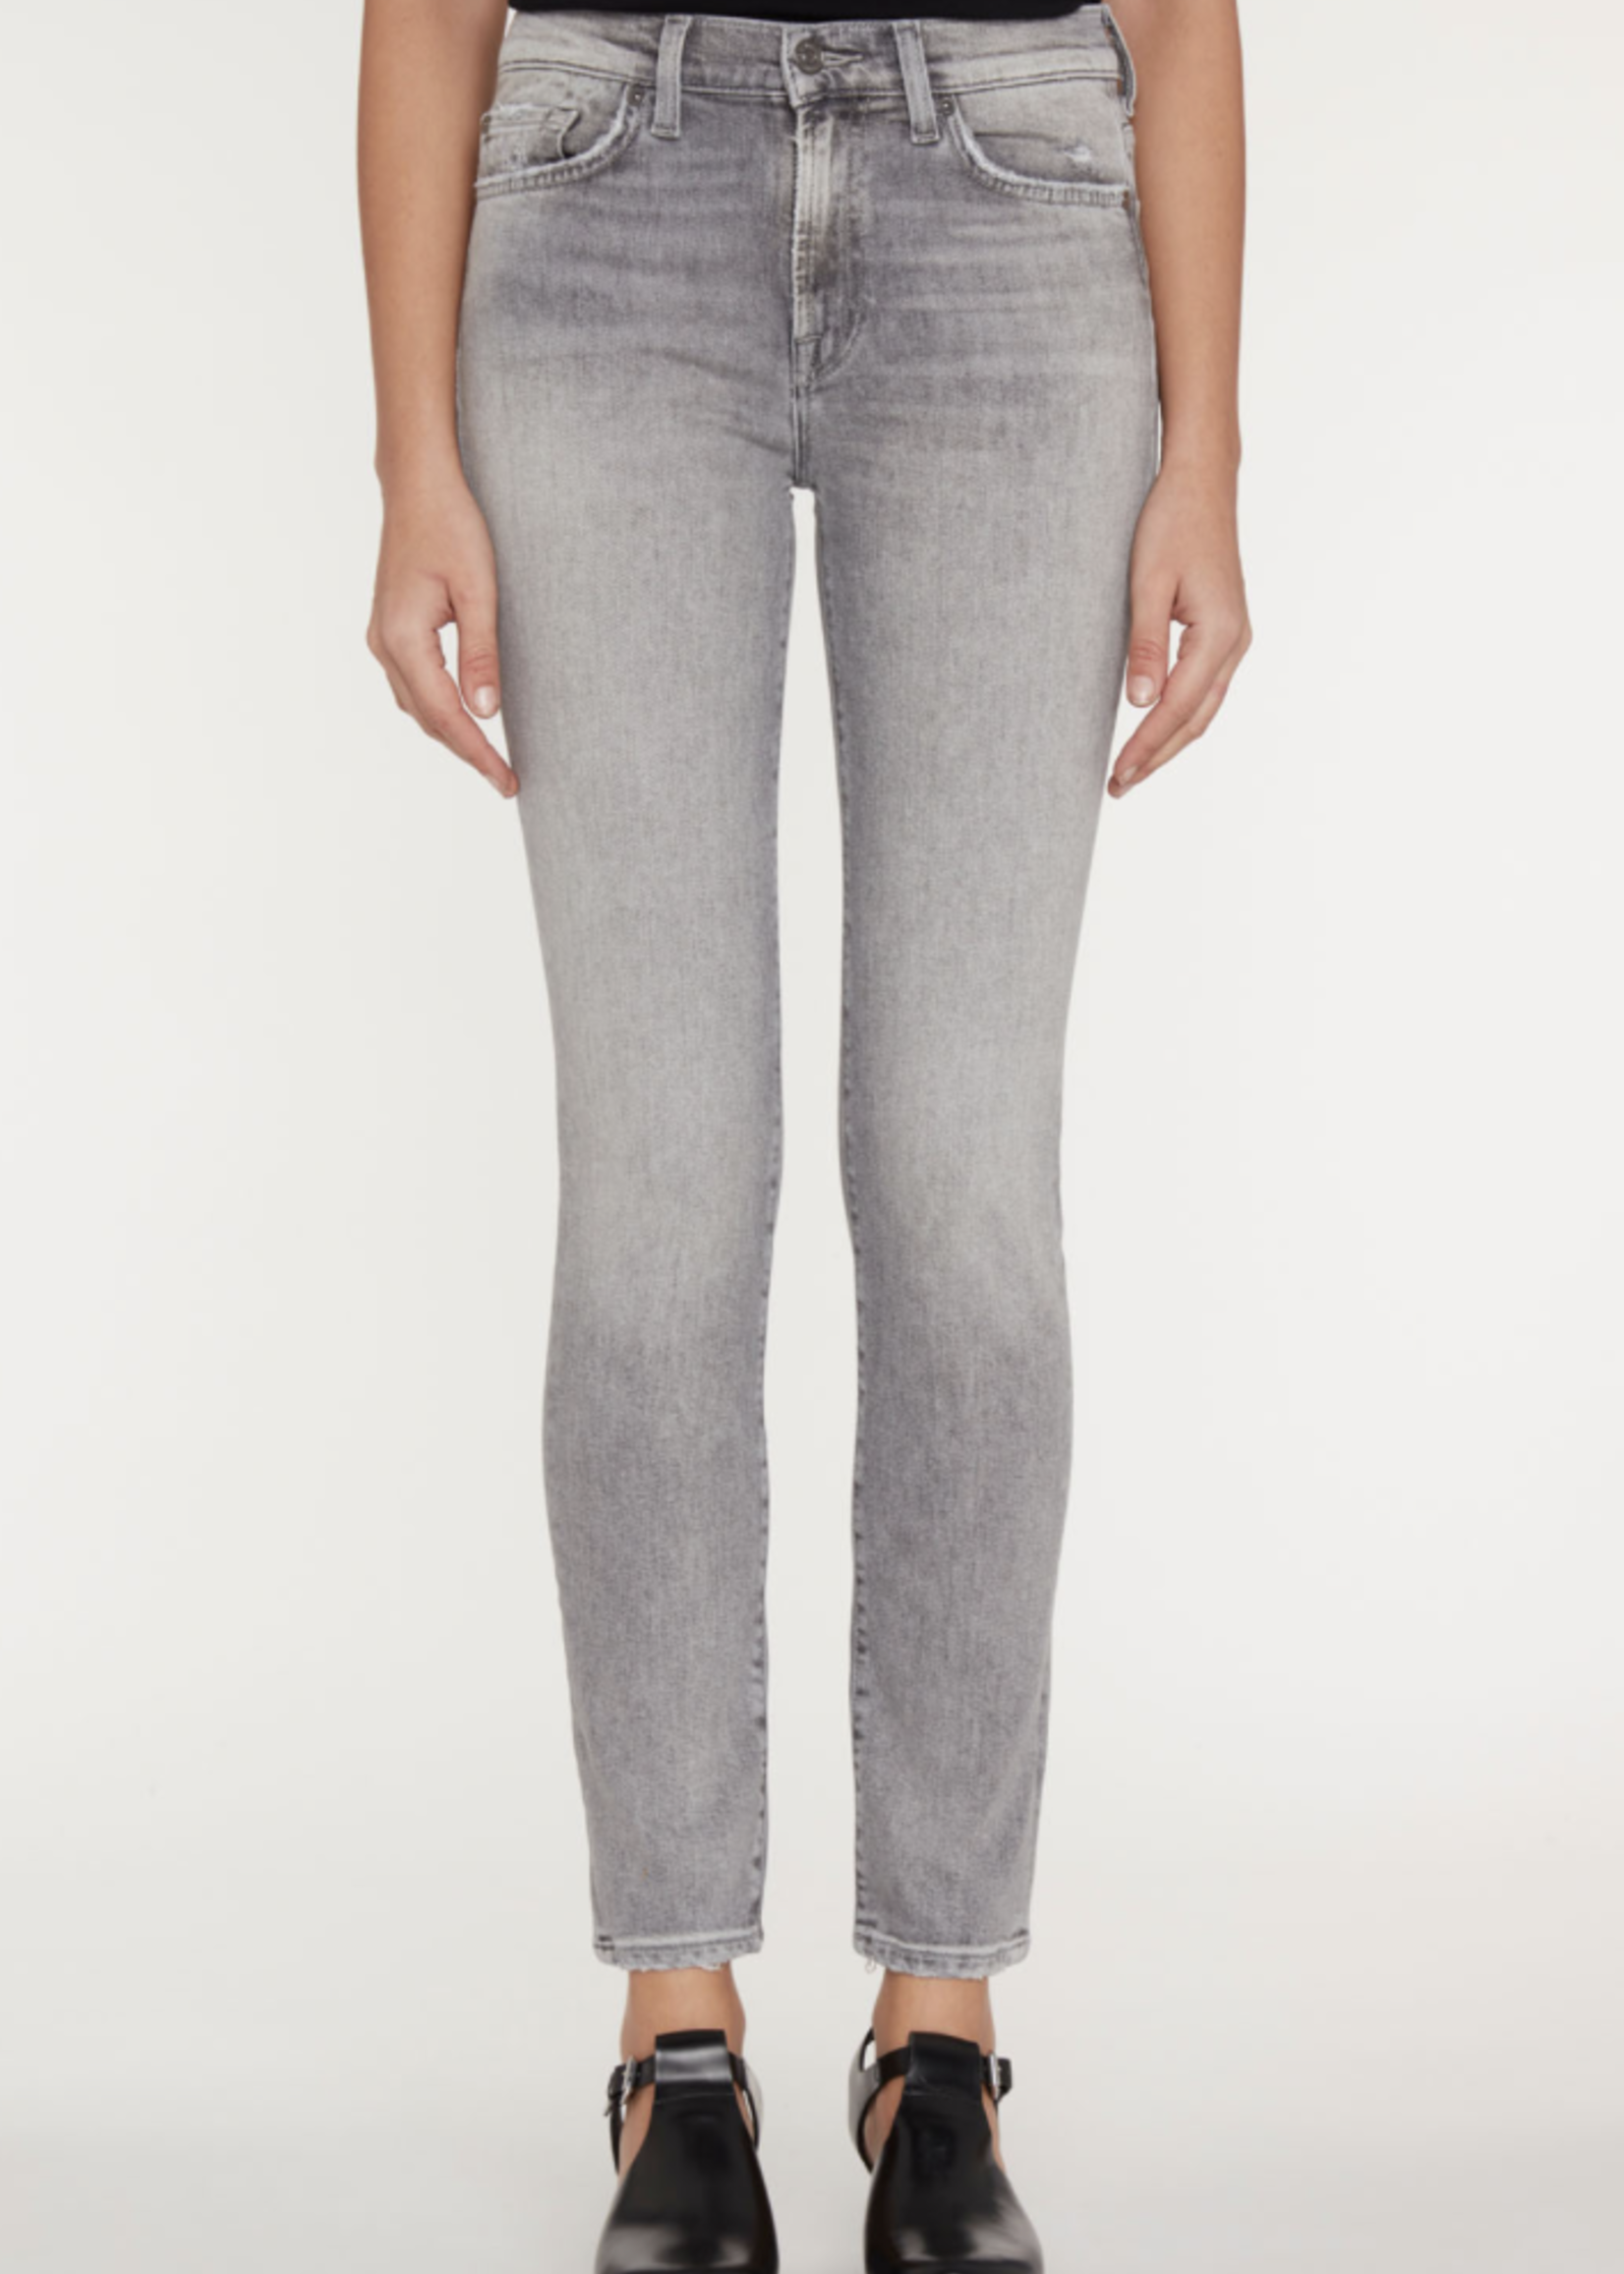 7 for all mankind 7 FAM ROXANNE Luxe Vintage Imprint